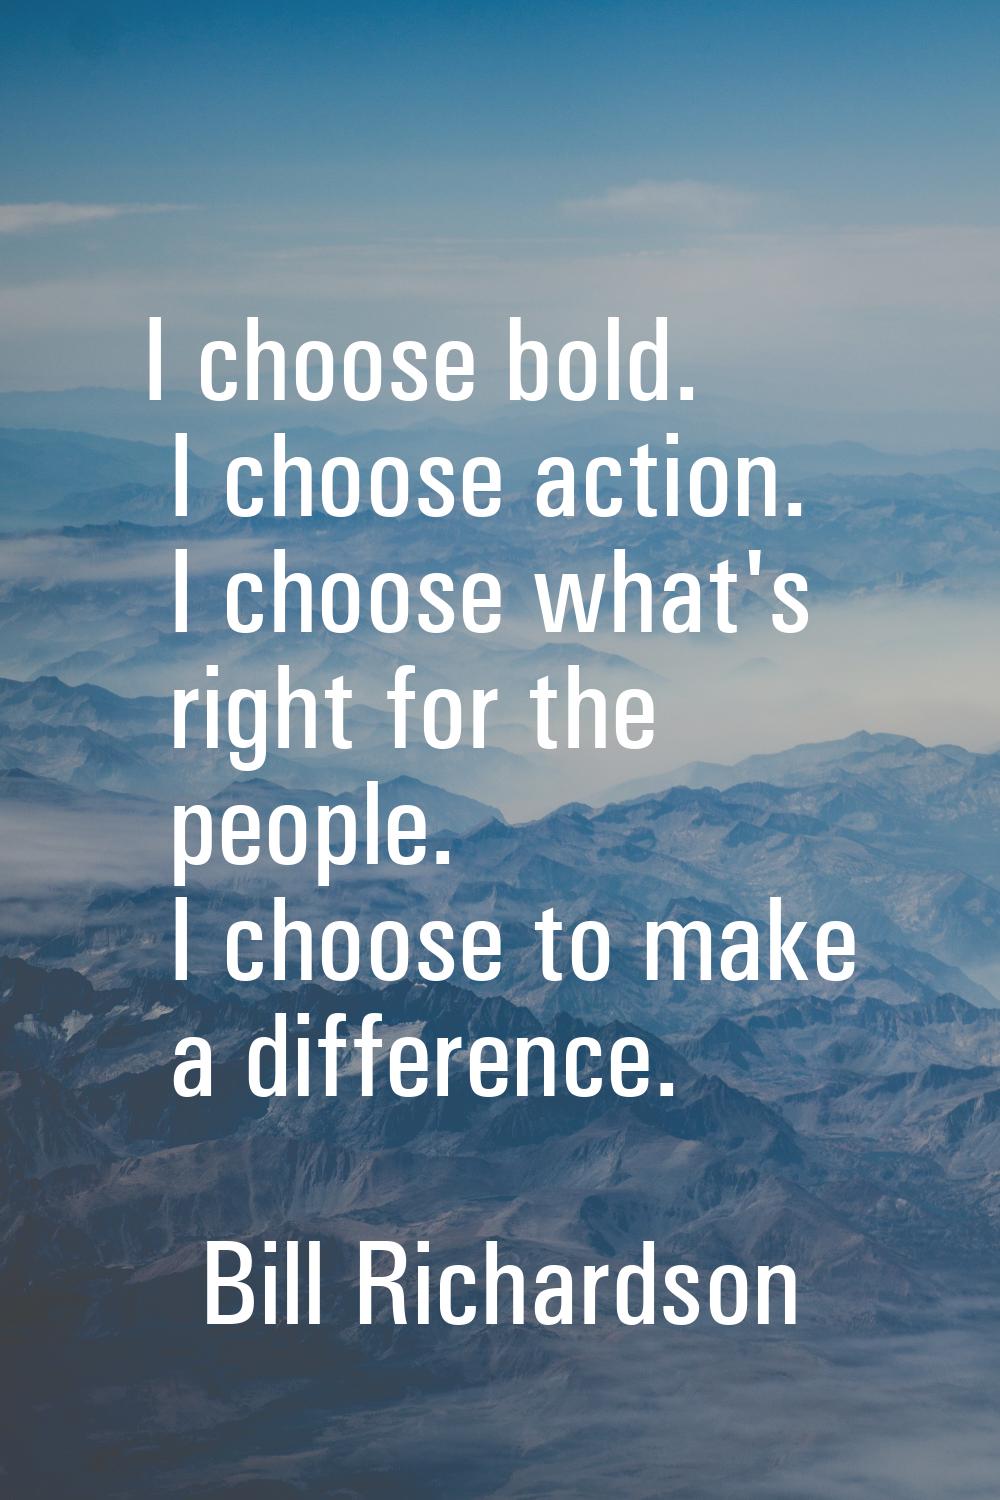 I choose bold. I choose action. I choose what's right for the people. I choose to make a difference